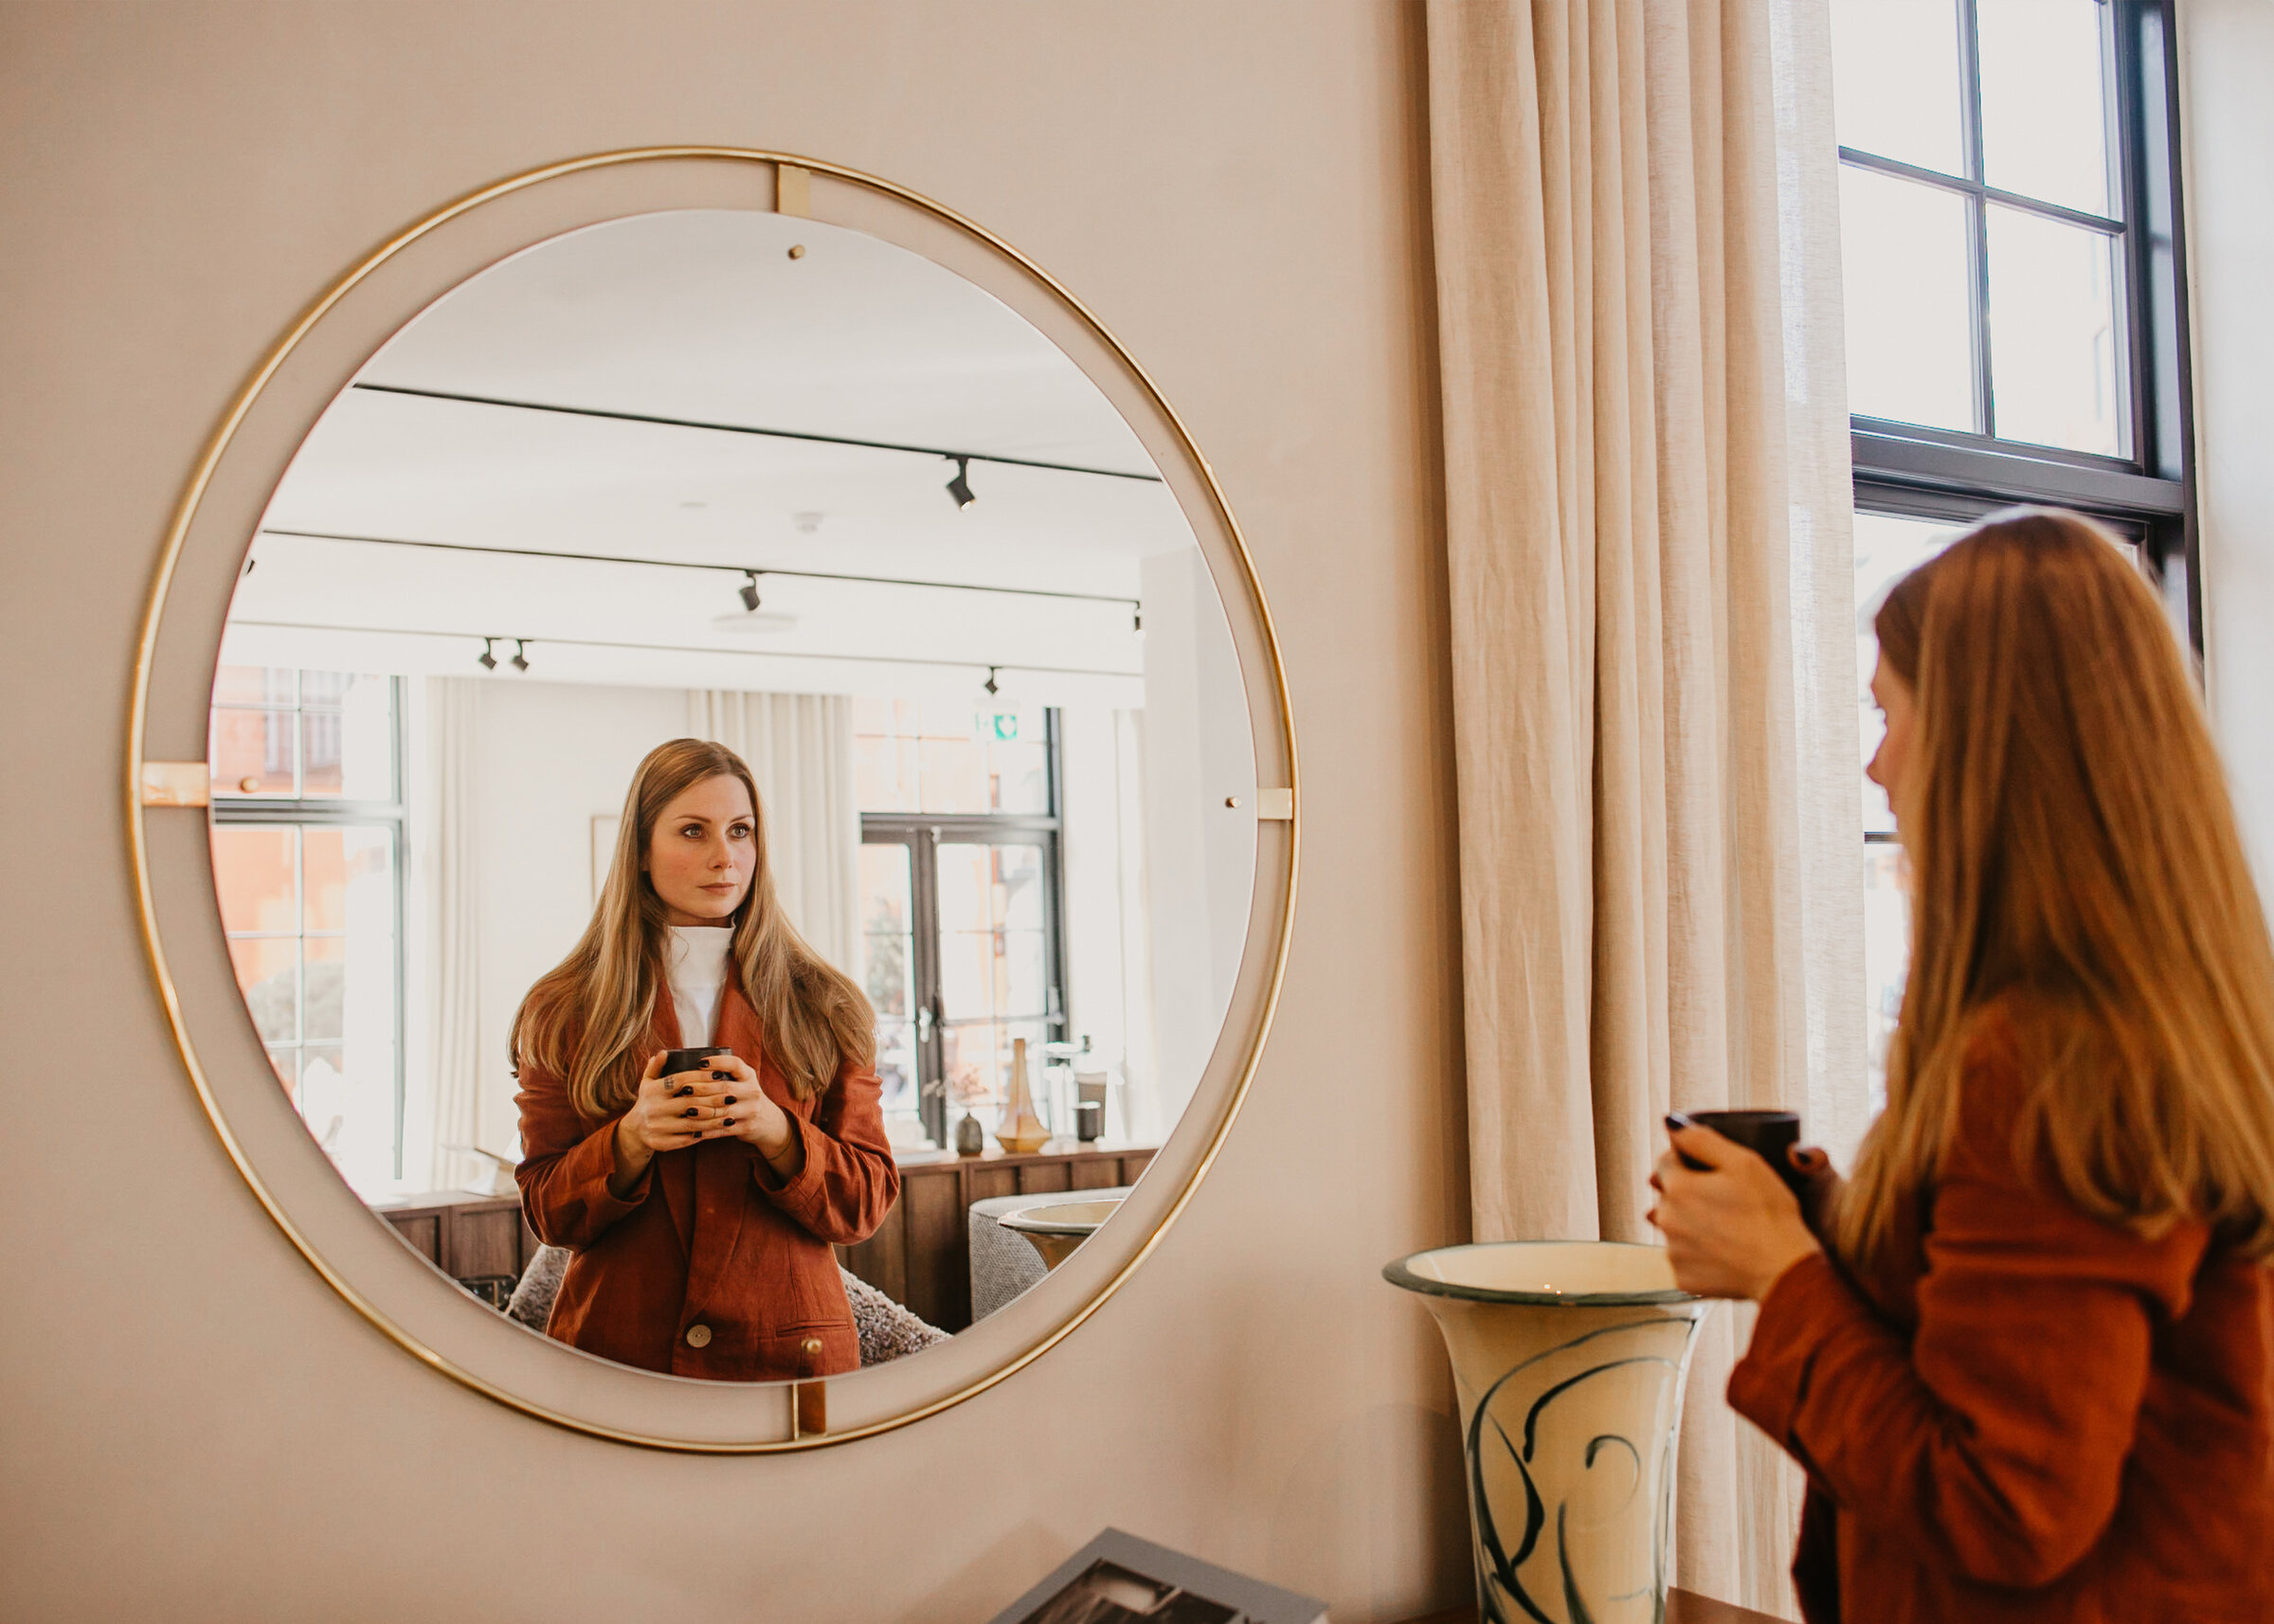 Barbora the manifestation coach looks at her own reflection in the mirror